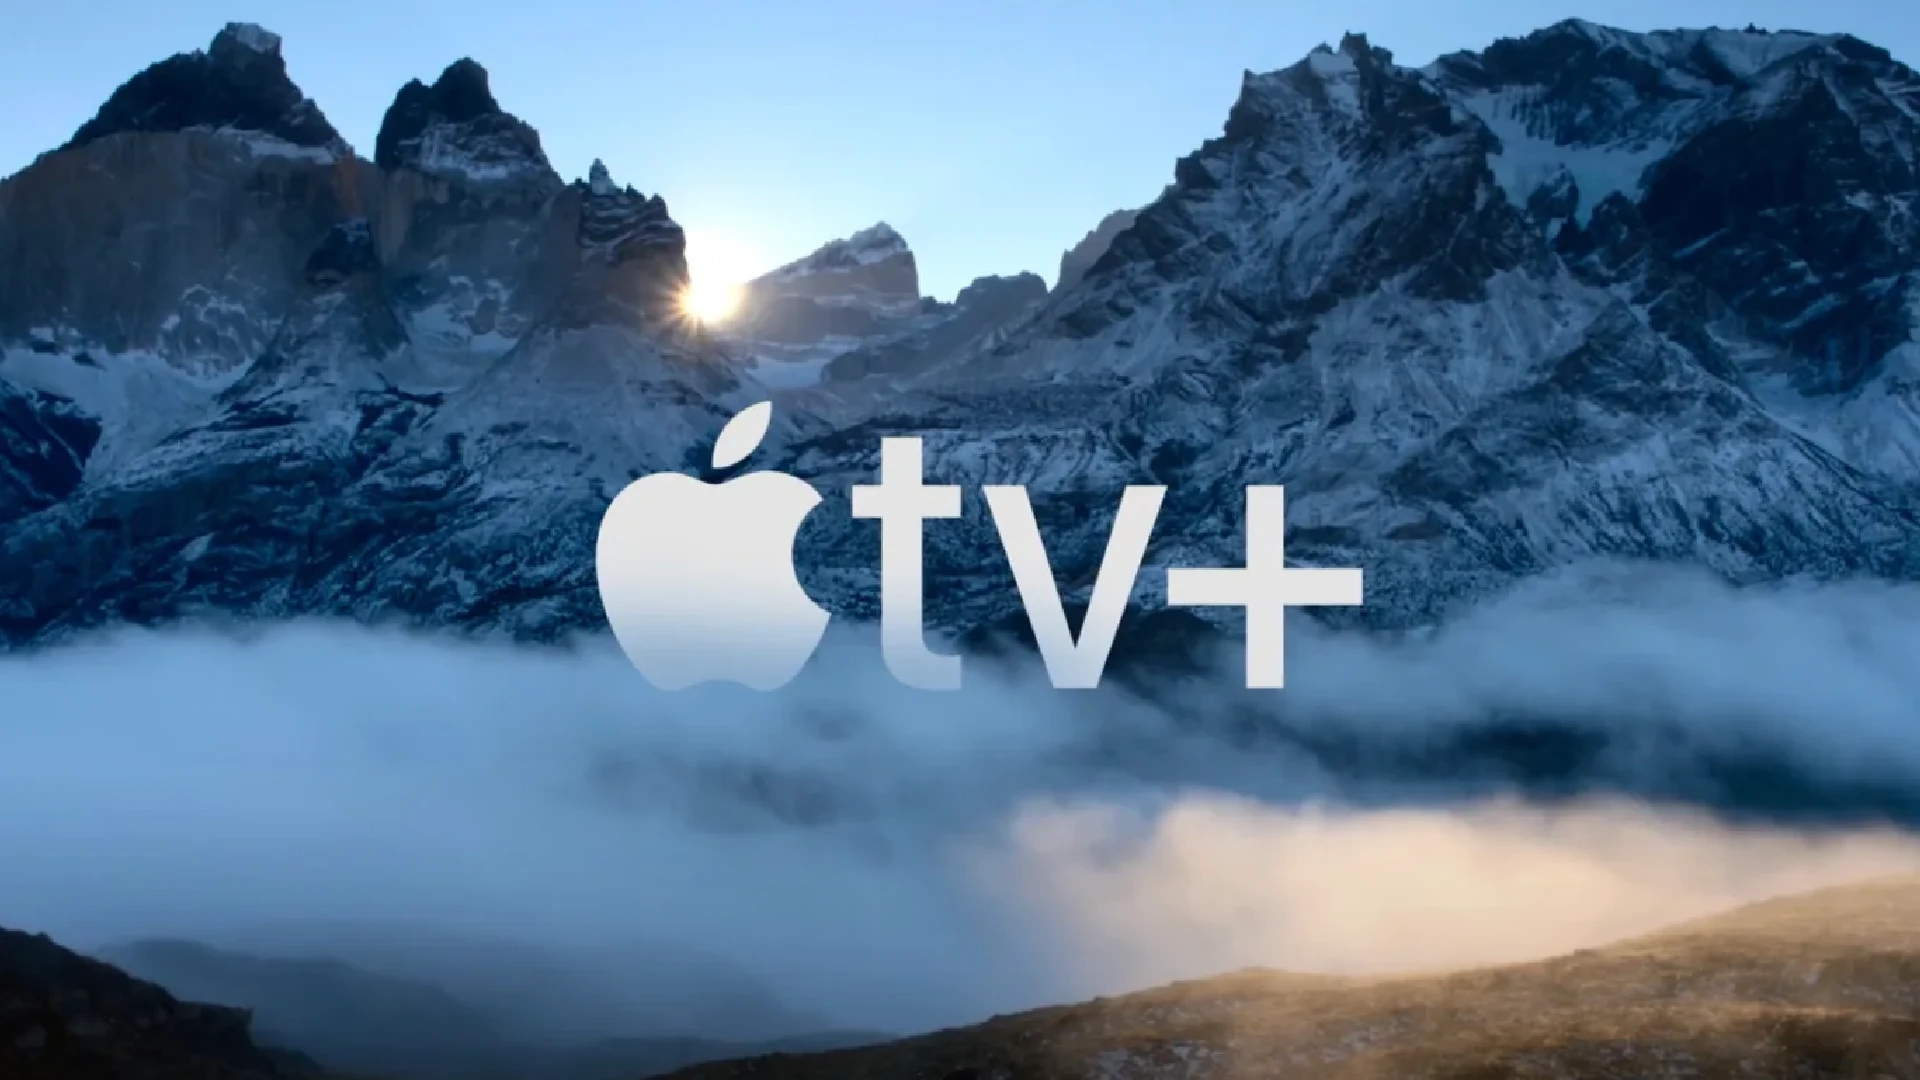 Globally, Apple TV+ takes on HBO Max and gains market share